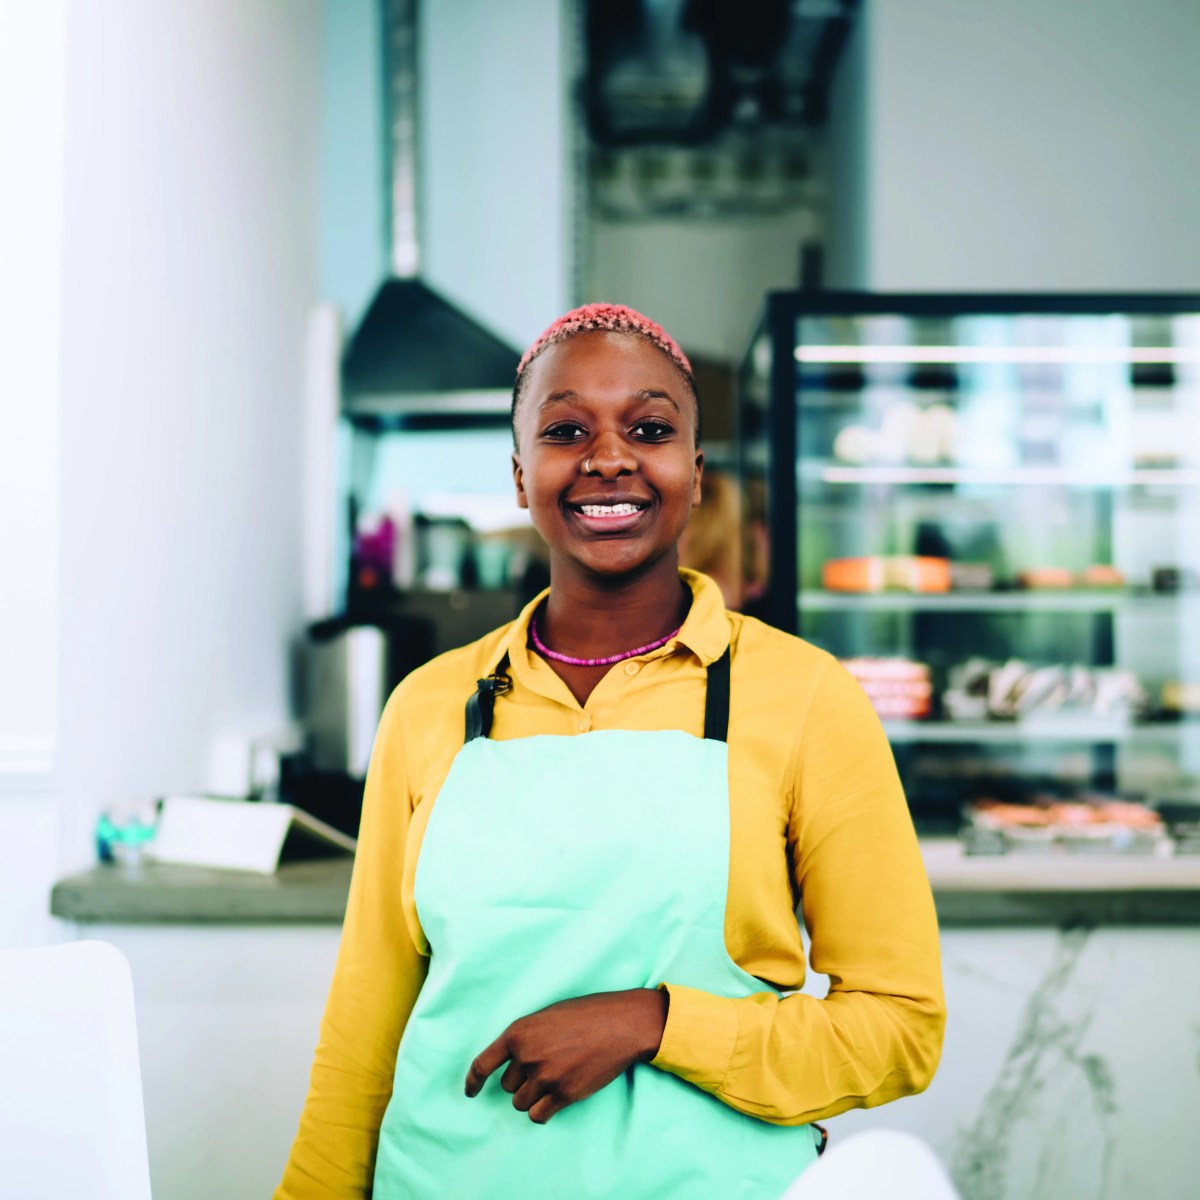 Person in apron smiling while working in a cafe